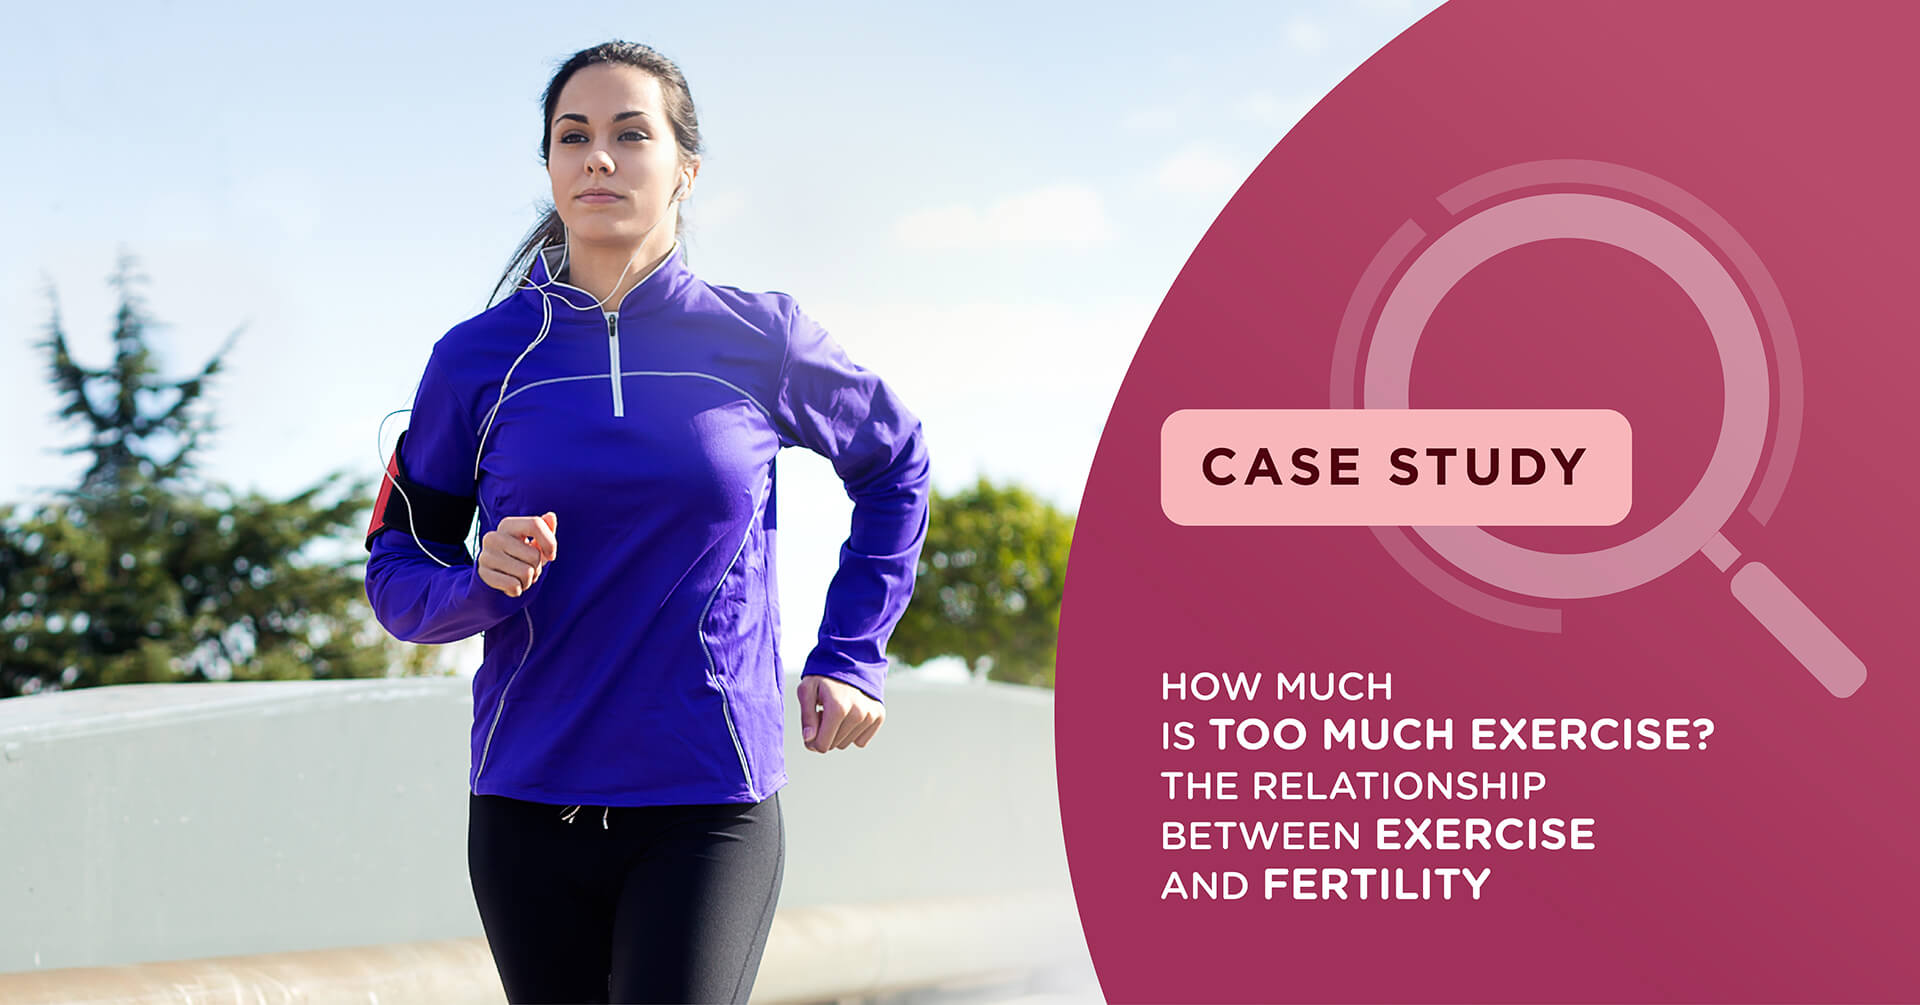 How much is too much exercise? The relationship between exercise and fertility